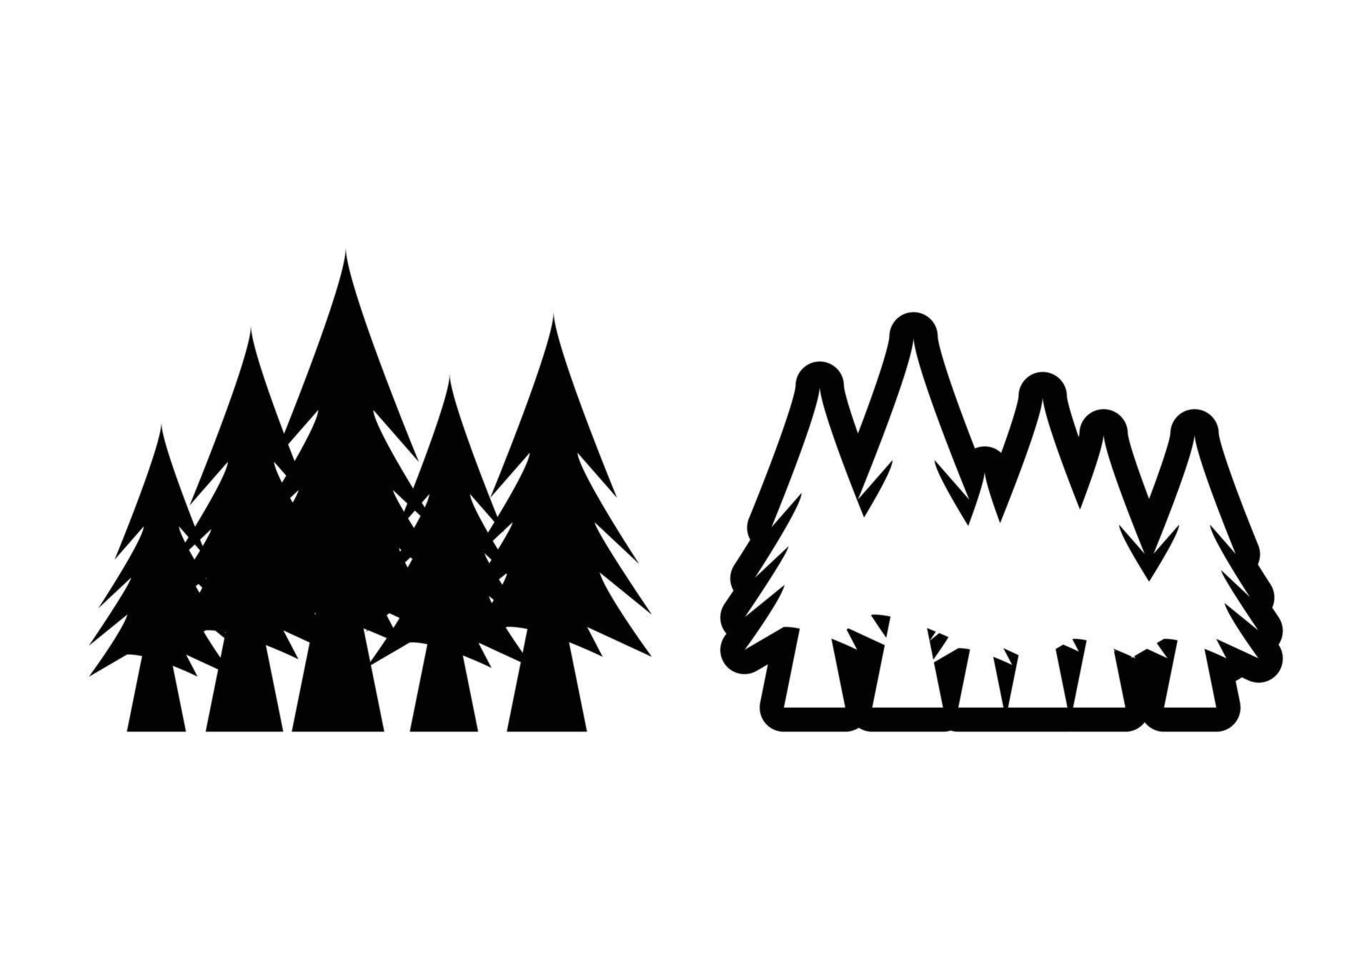 Pine tree forest silhouette isolated design vector